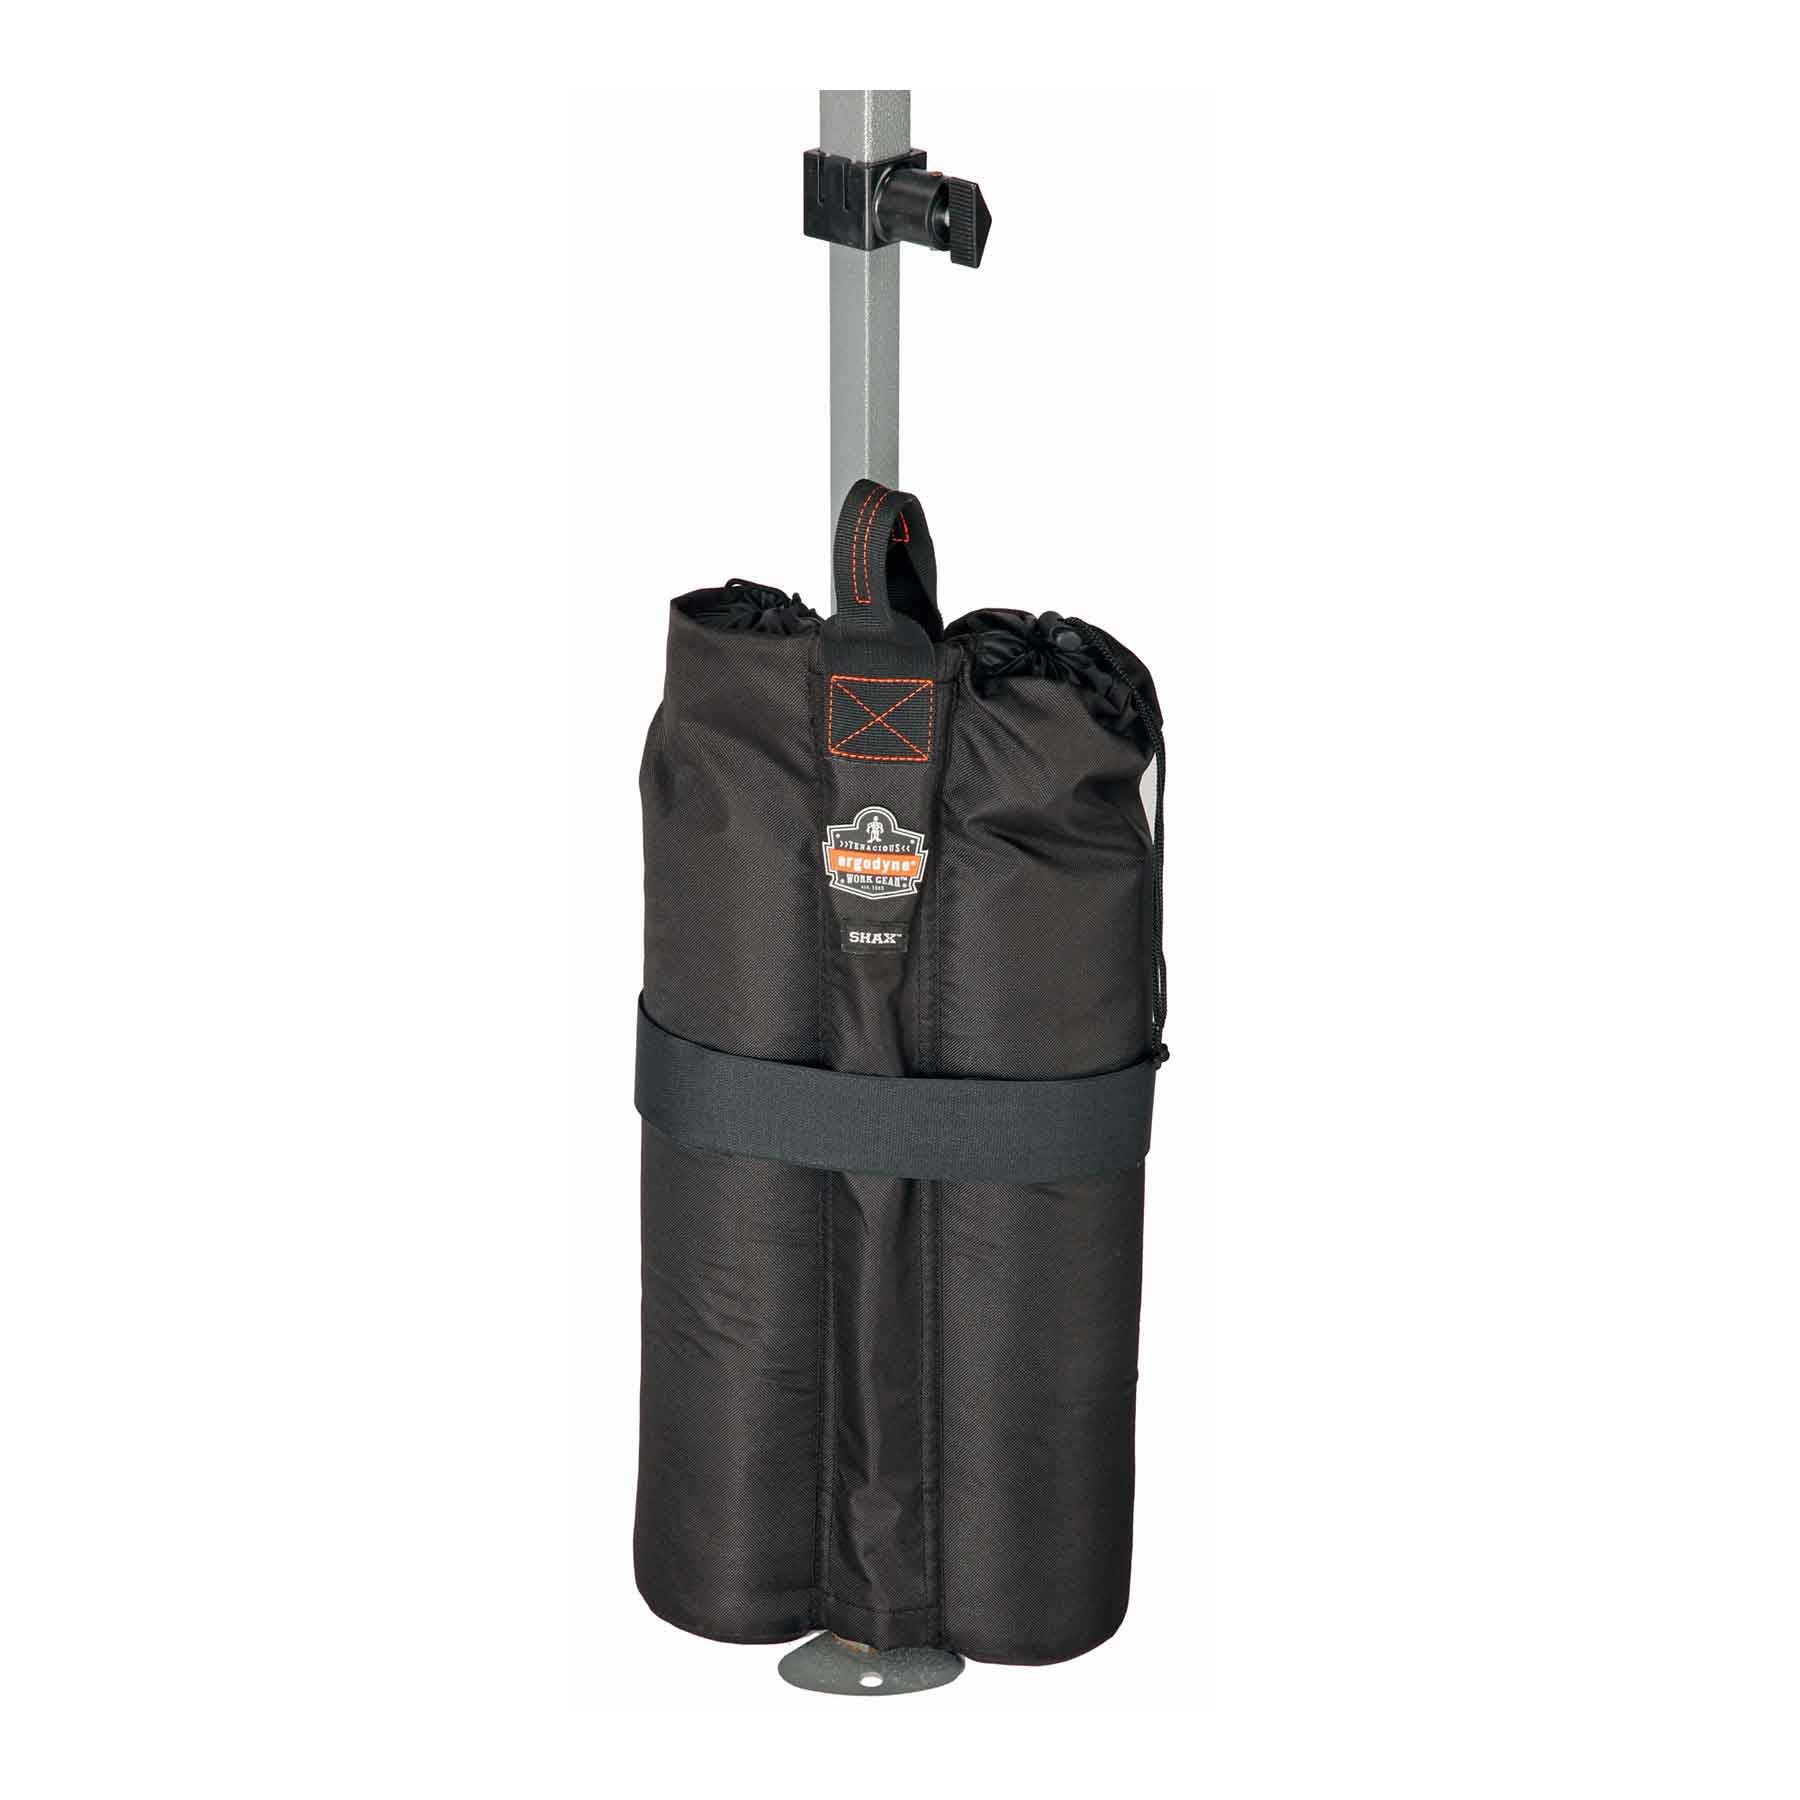 SHAX 6094 Tent Weight Bags